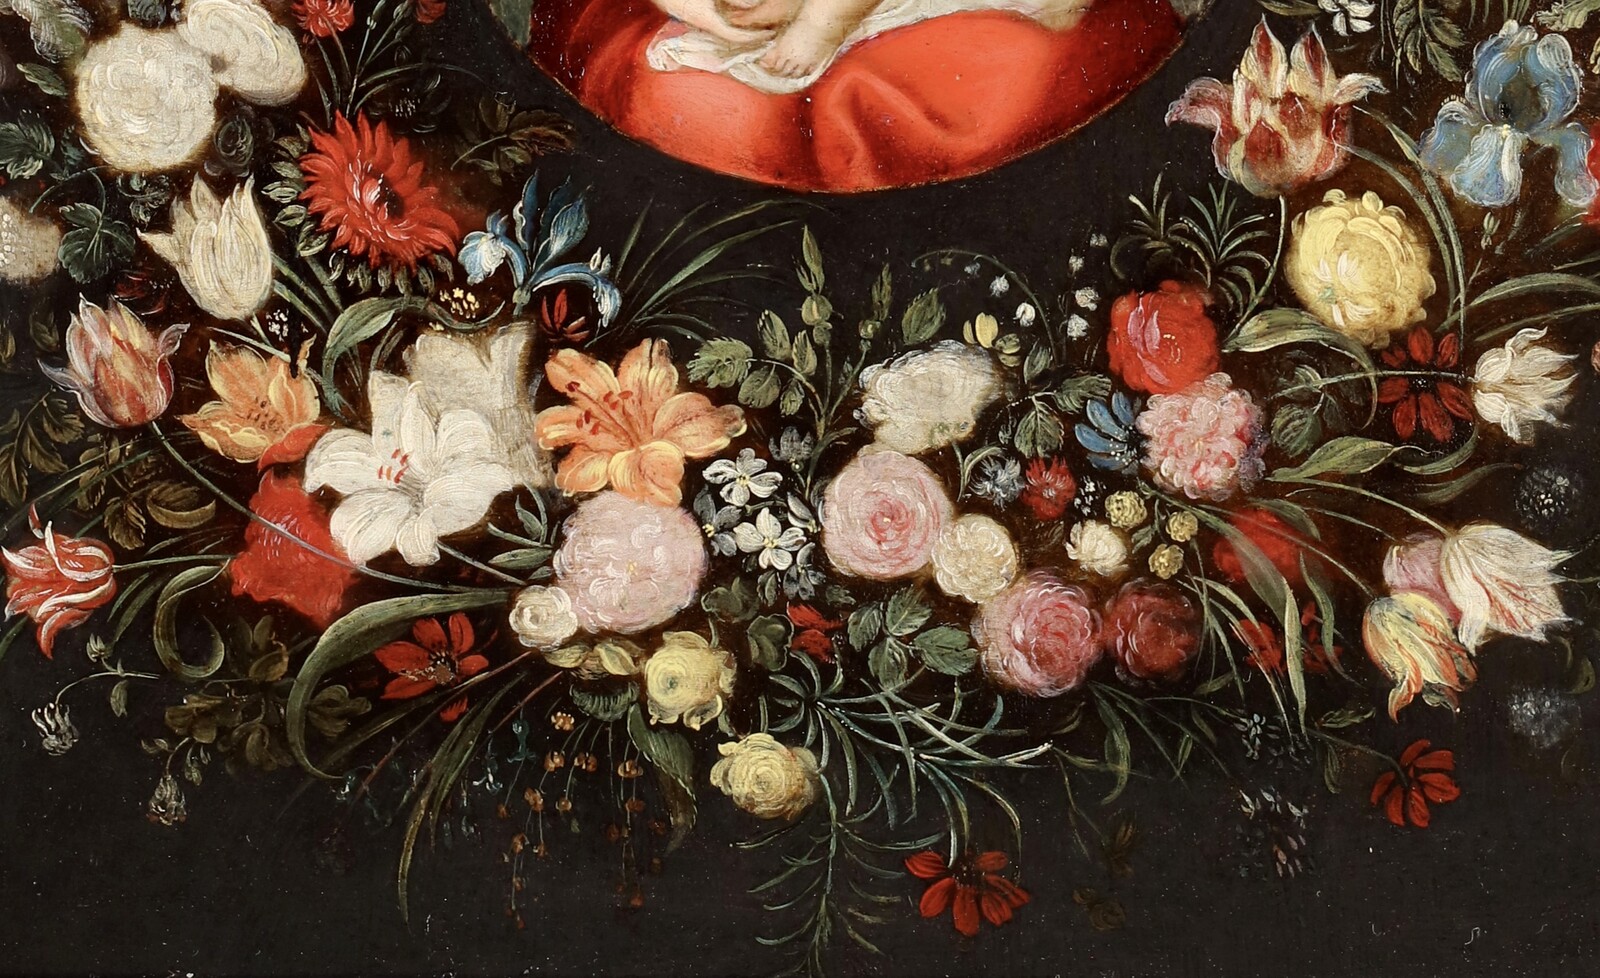 A garland of flowers surrounding the Virgin and Child